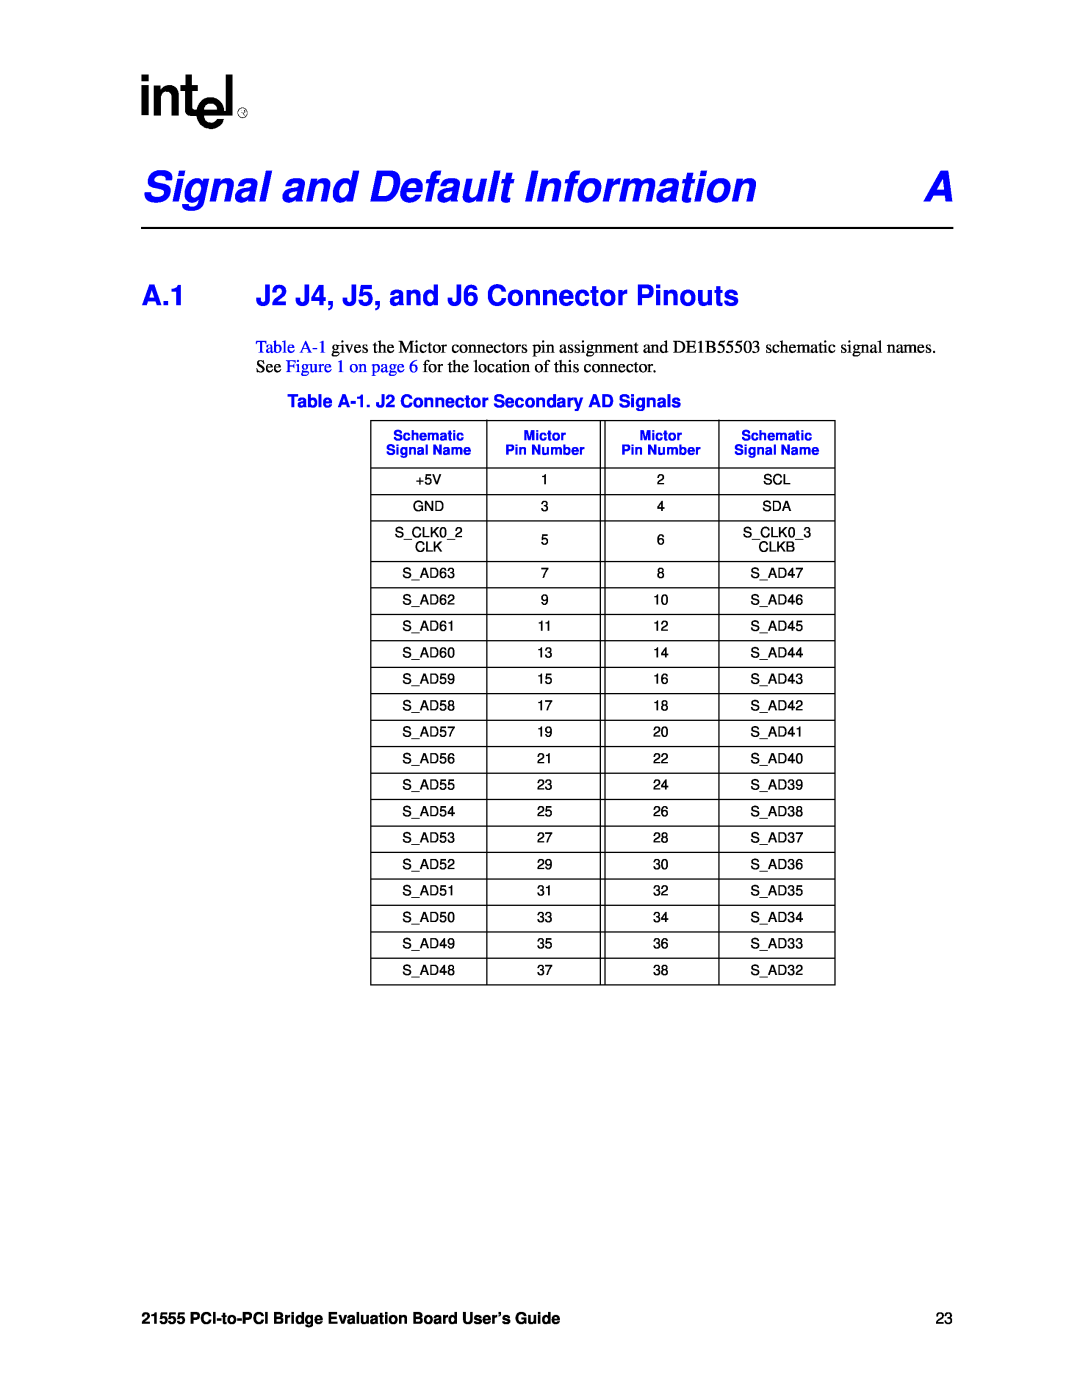 Intel 21555 manual Signal and Default Information, A.1 J2 J4, J5, and J6 Connector Pinouts 